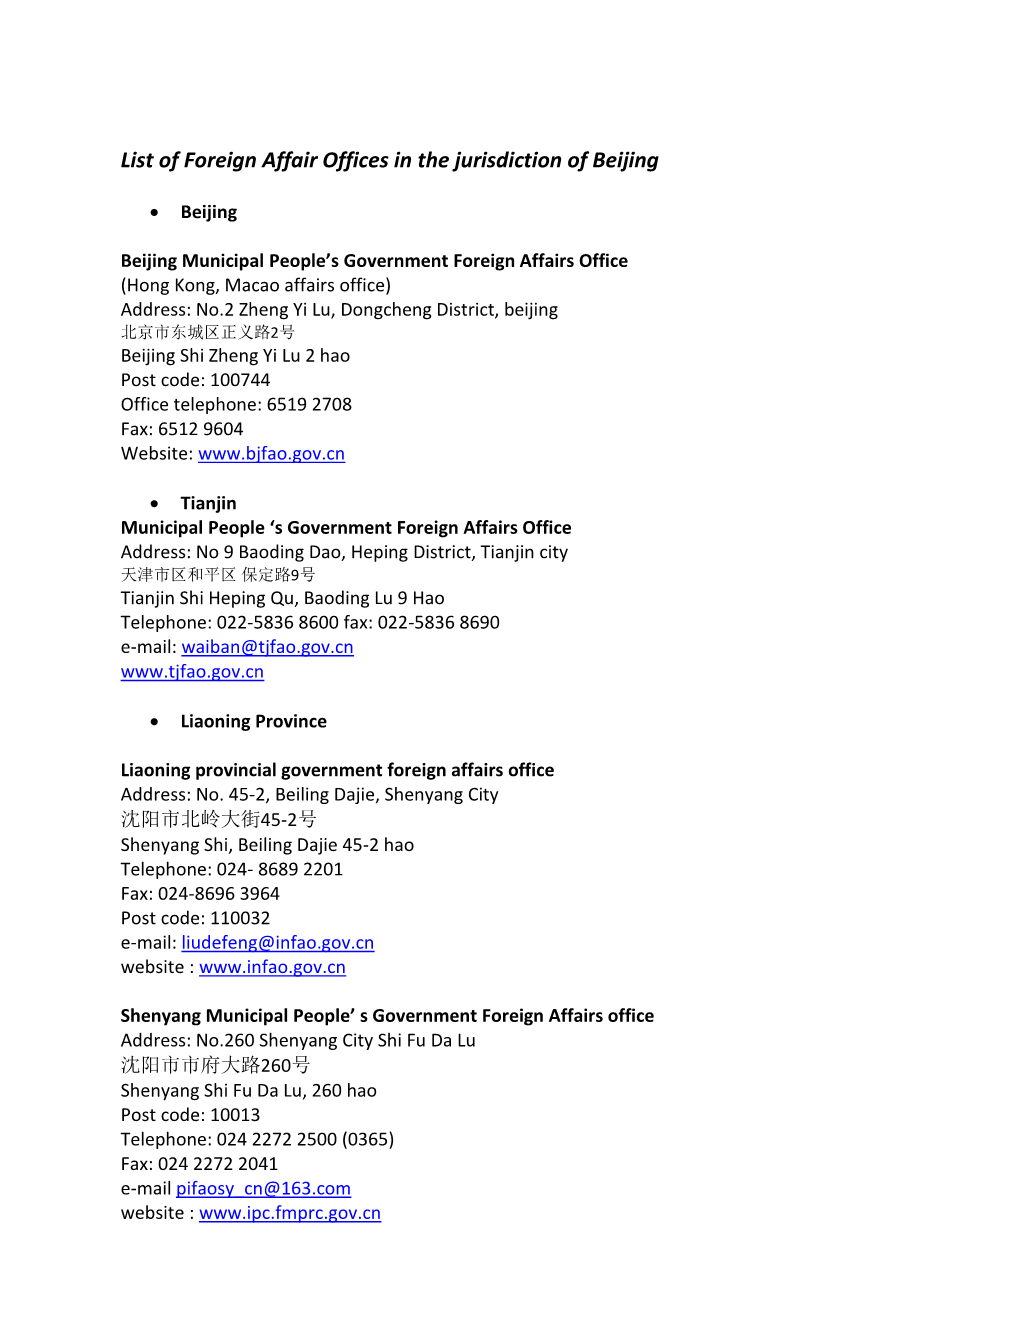 List of Foreign Affair Offices in the Jurisdiction of Beijing